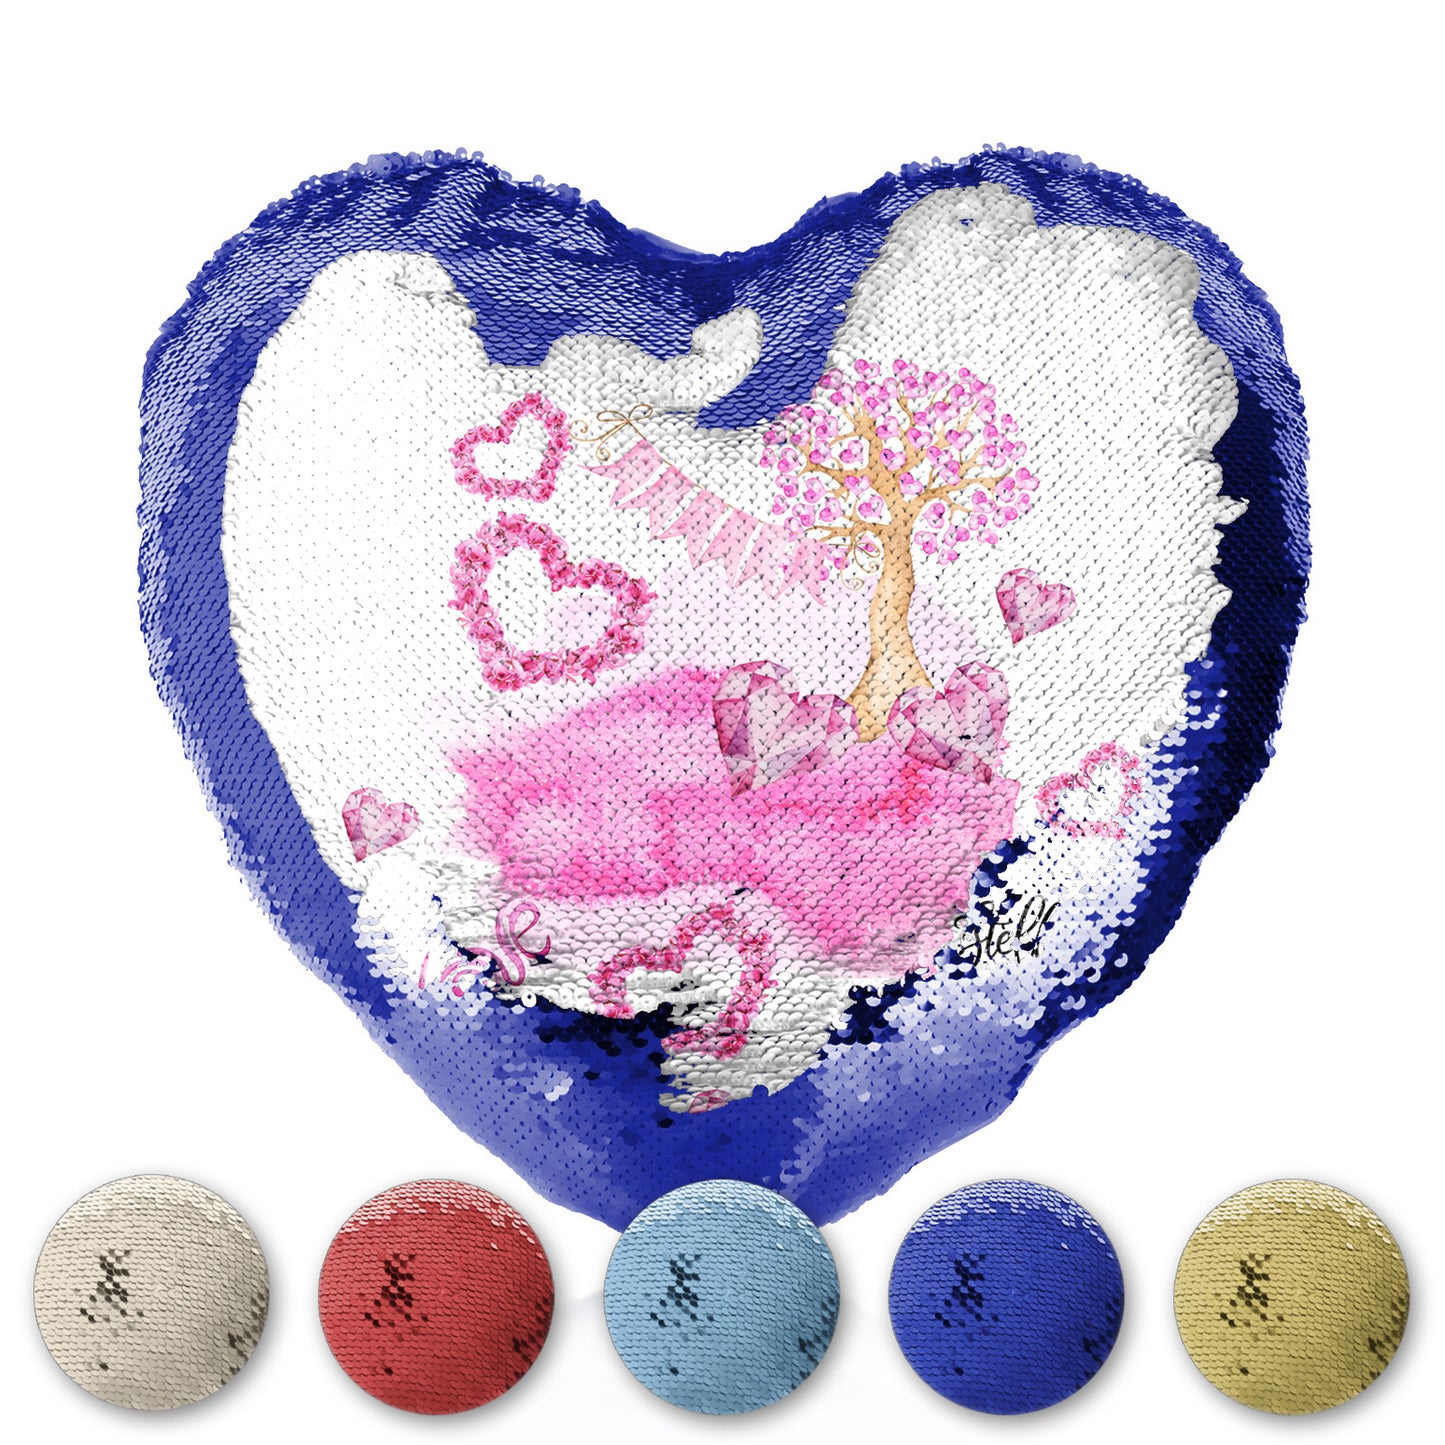 Personalised Sequin Heart Cushion with Stylish Text and Pink Love Landscape Print